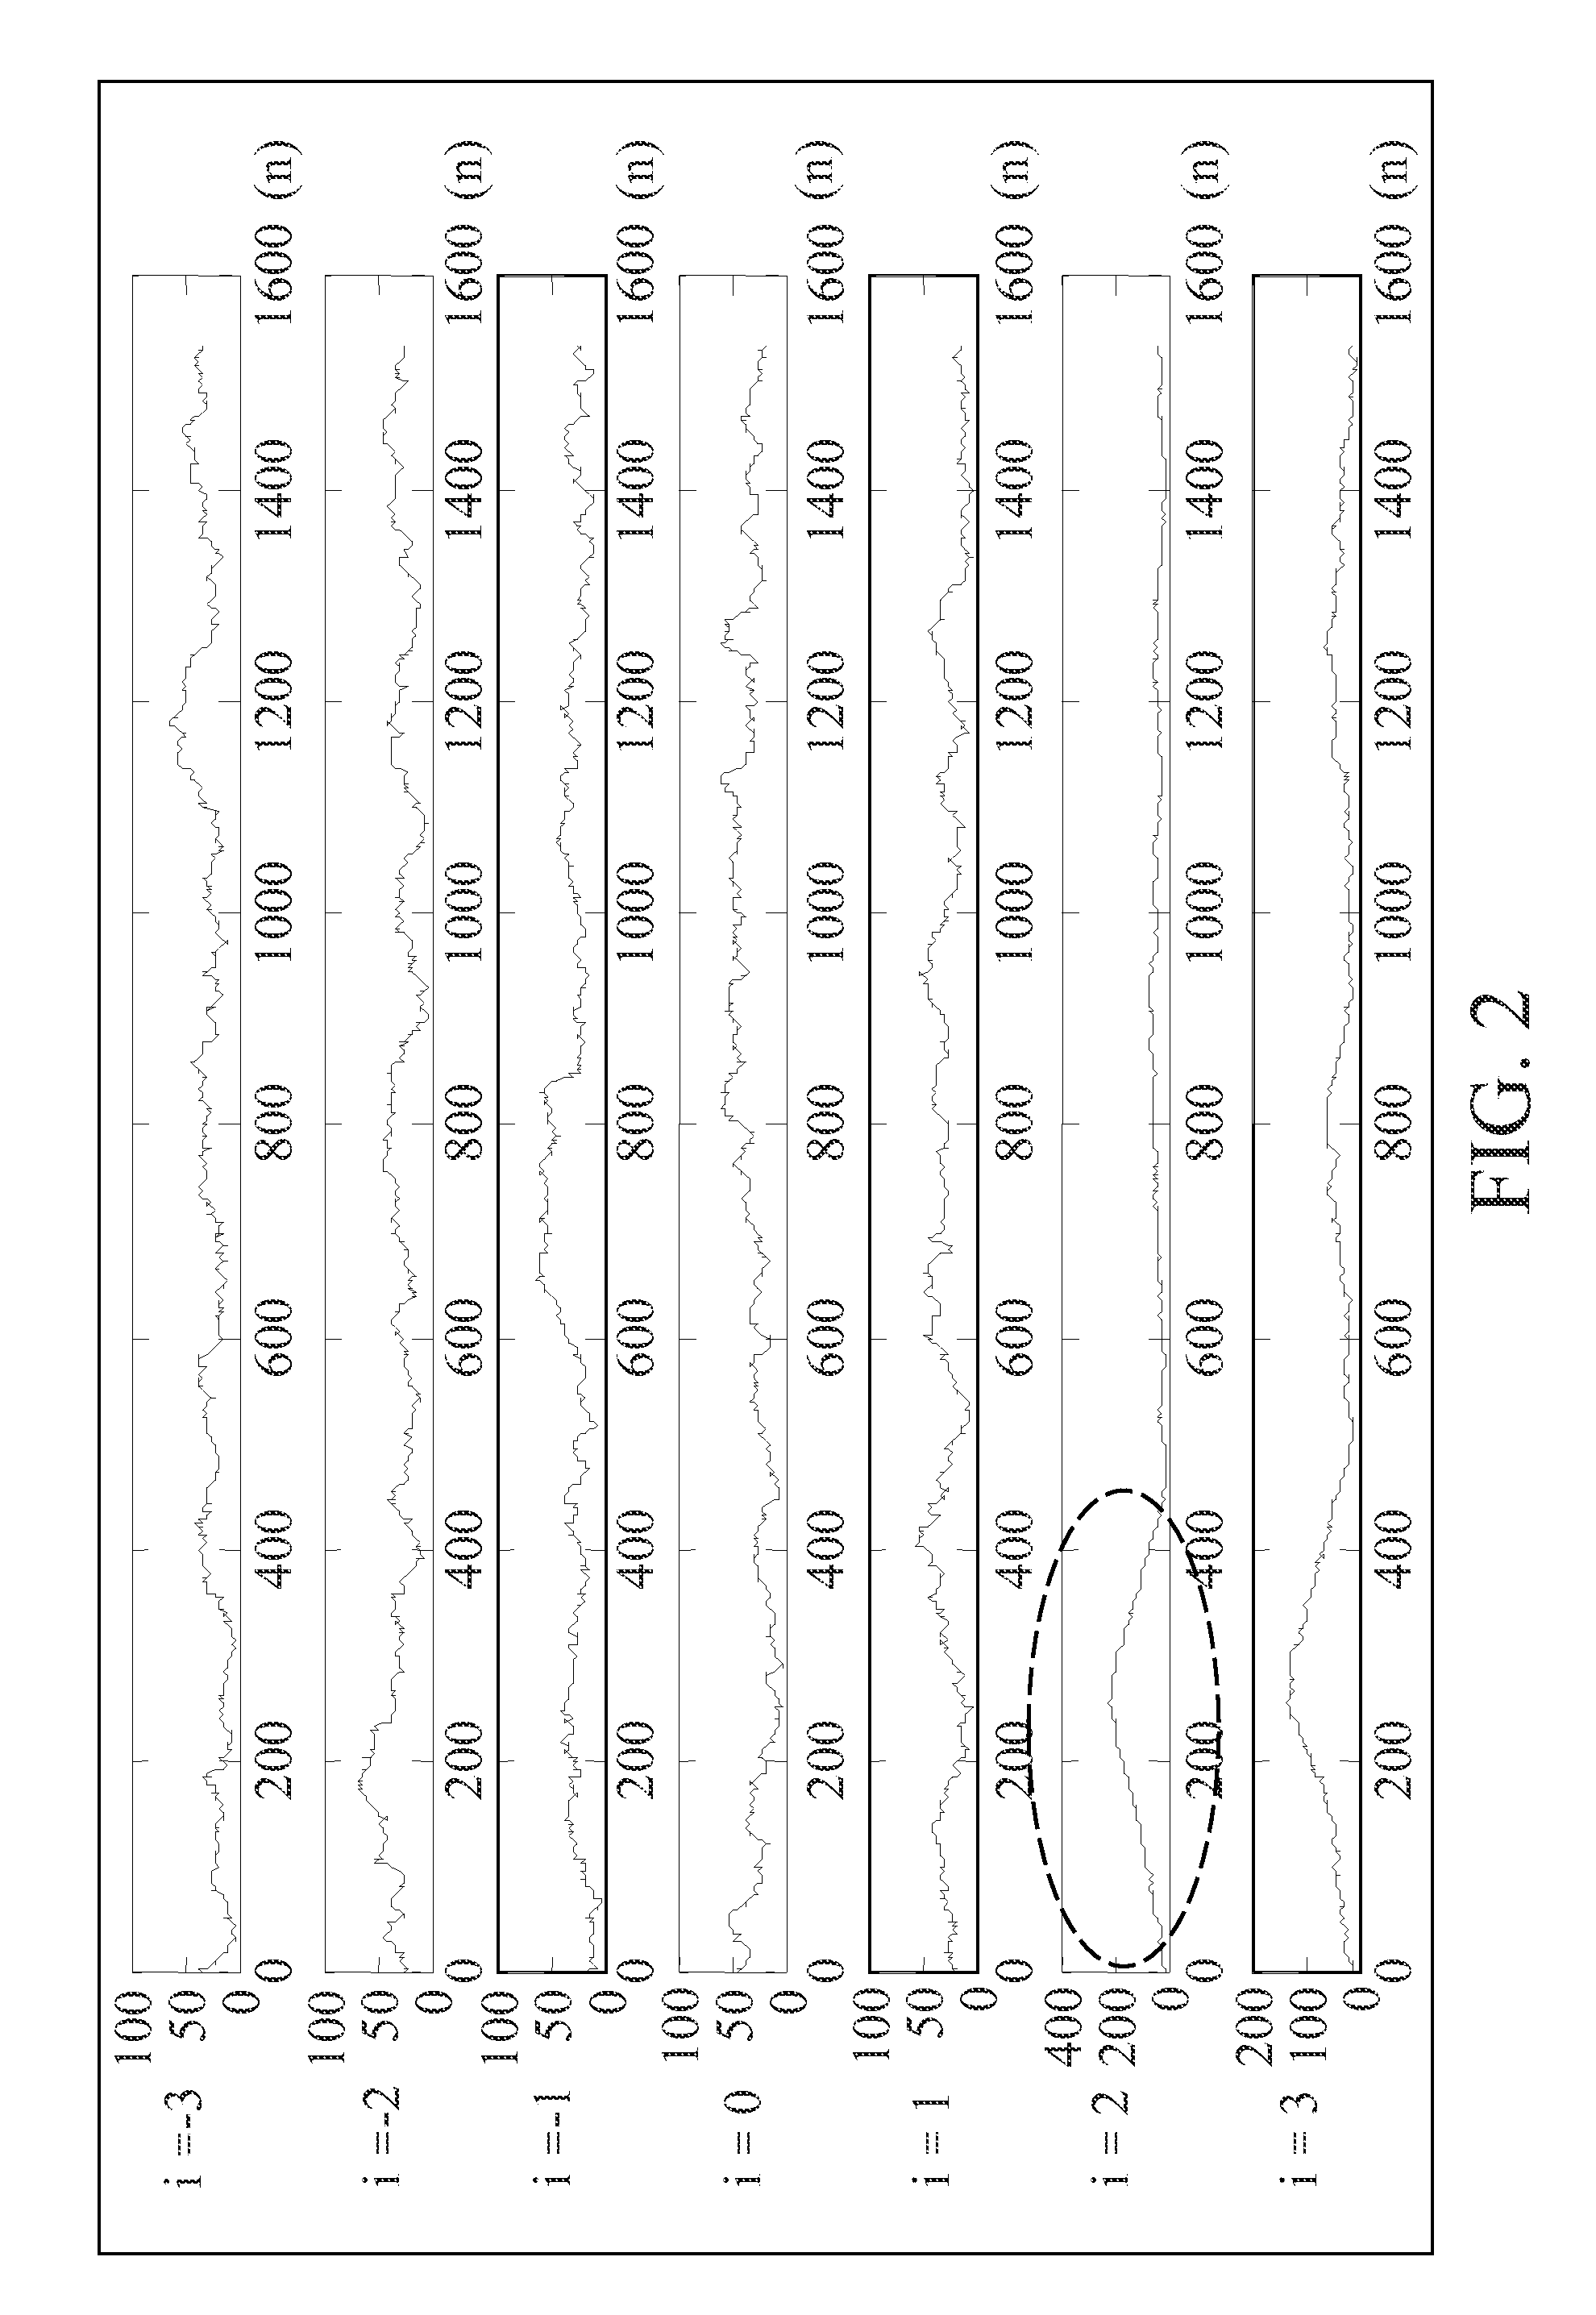 Compensating devices and methods for detecting and compensating for sampling clock offset